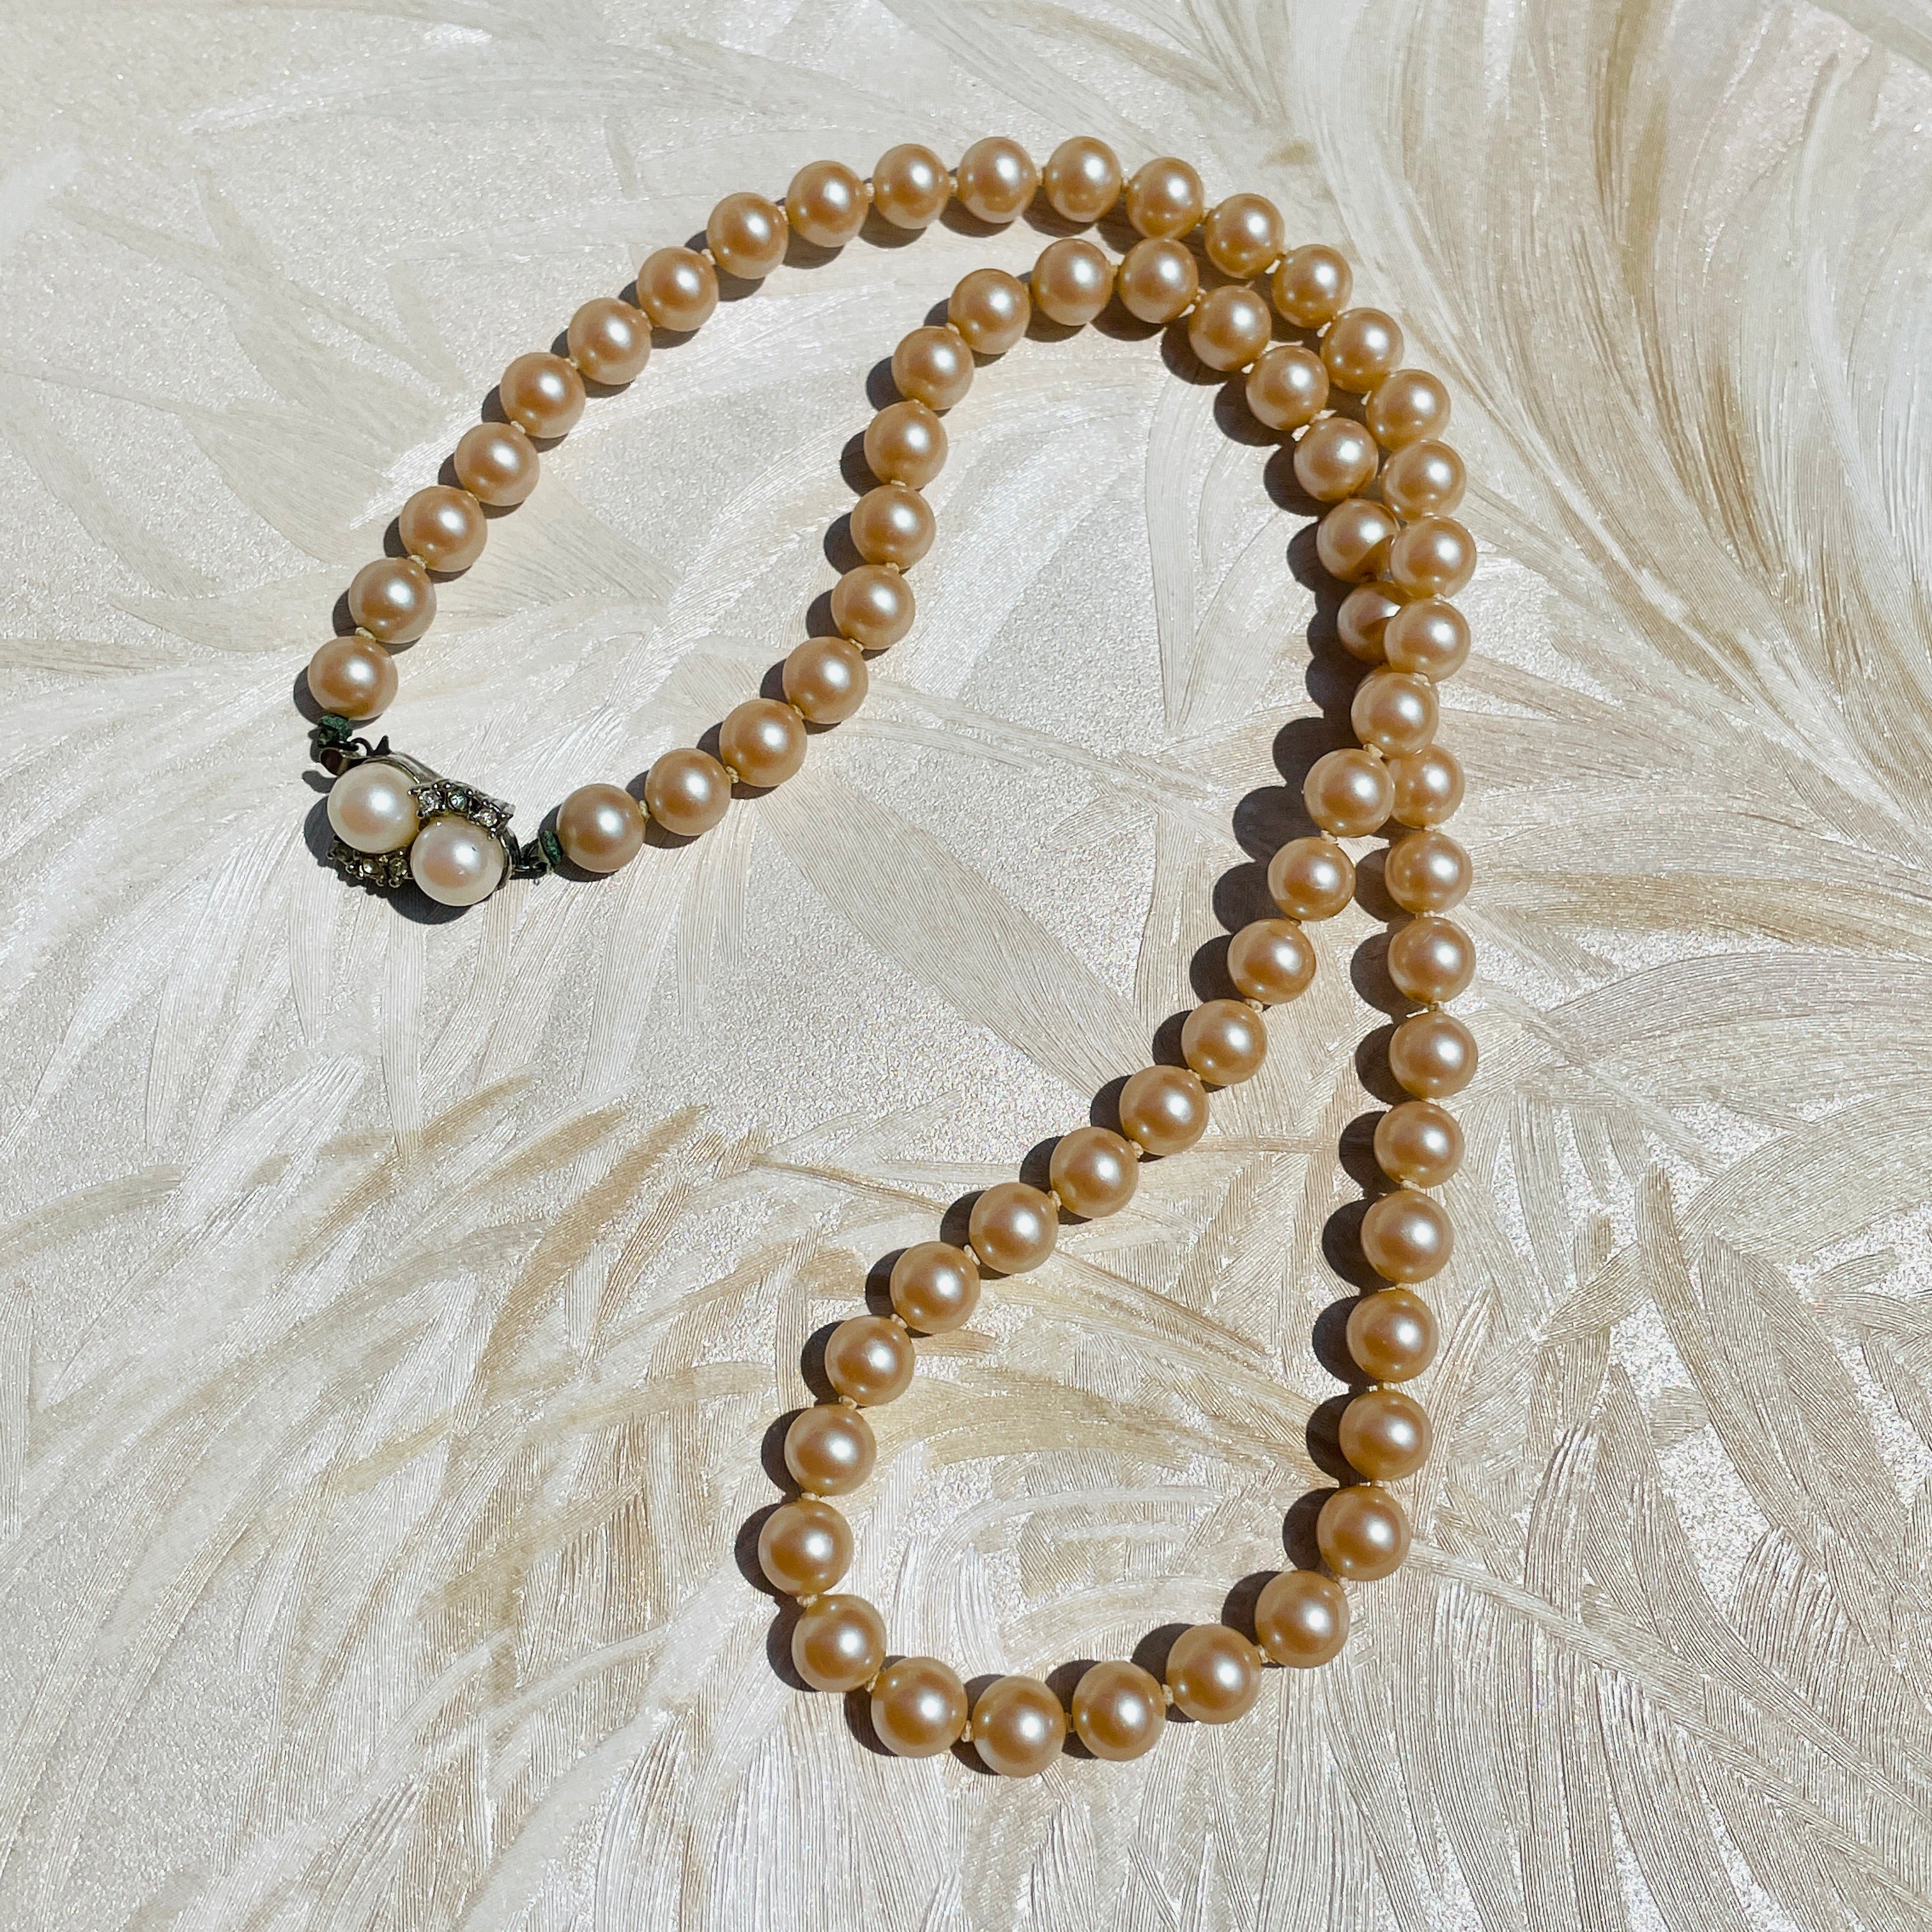 Fancy Clasp Blush Pearl Necklace